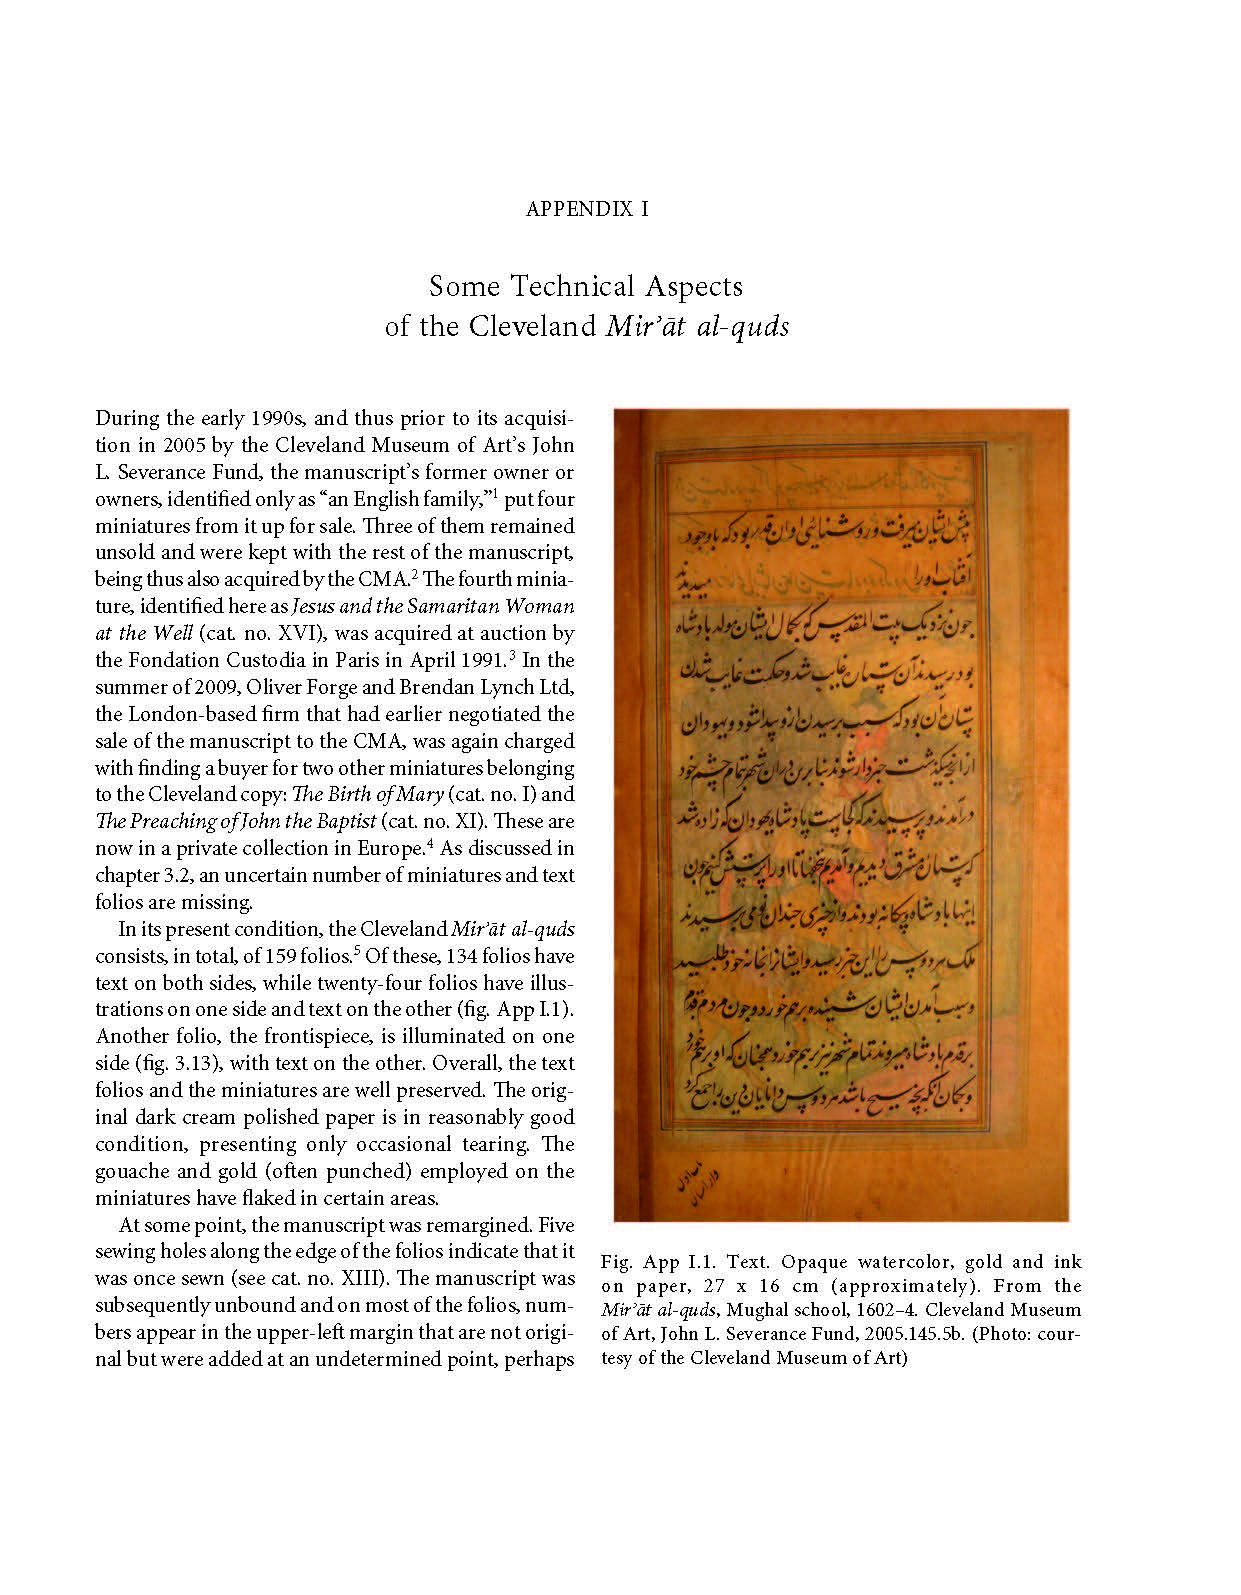 Appendix I: Some Technical Aspects of the Mir'at al-Quds